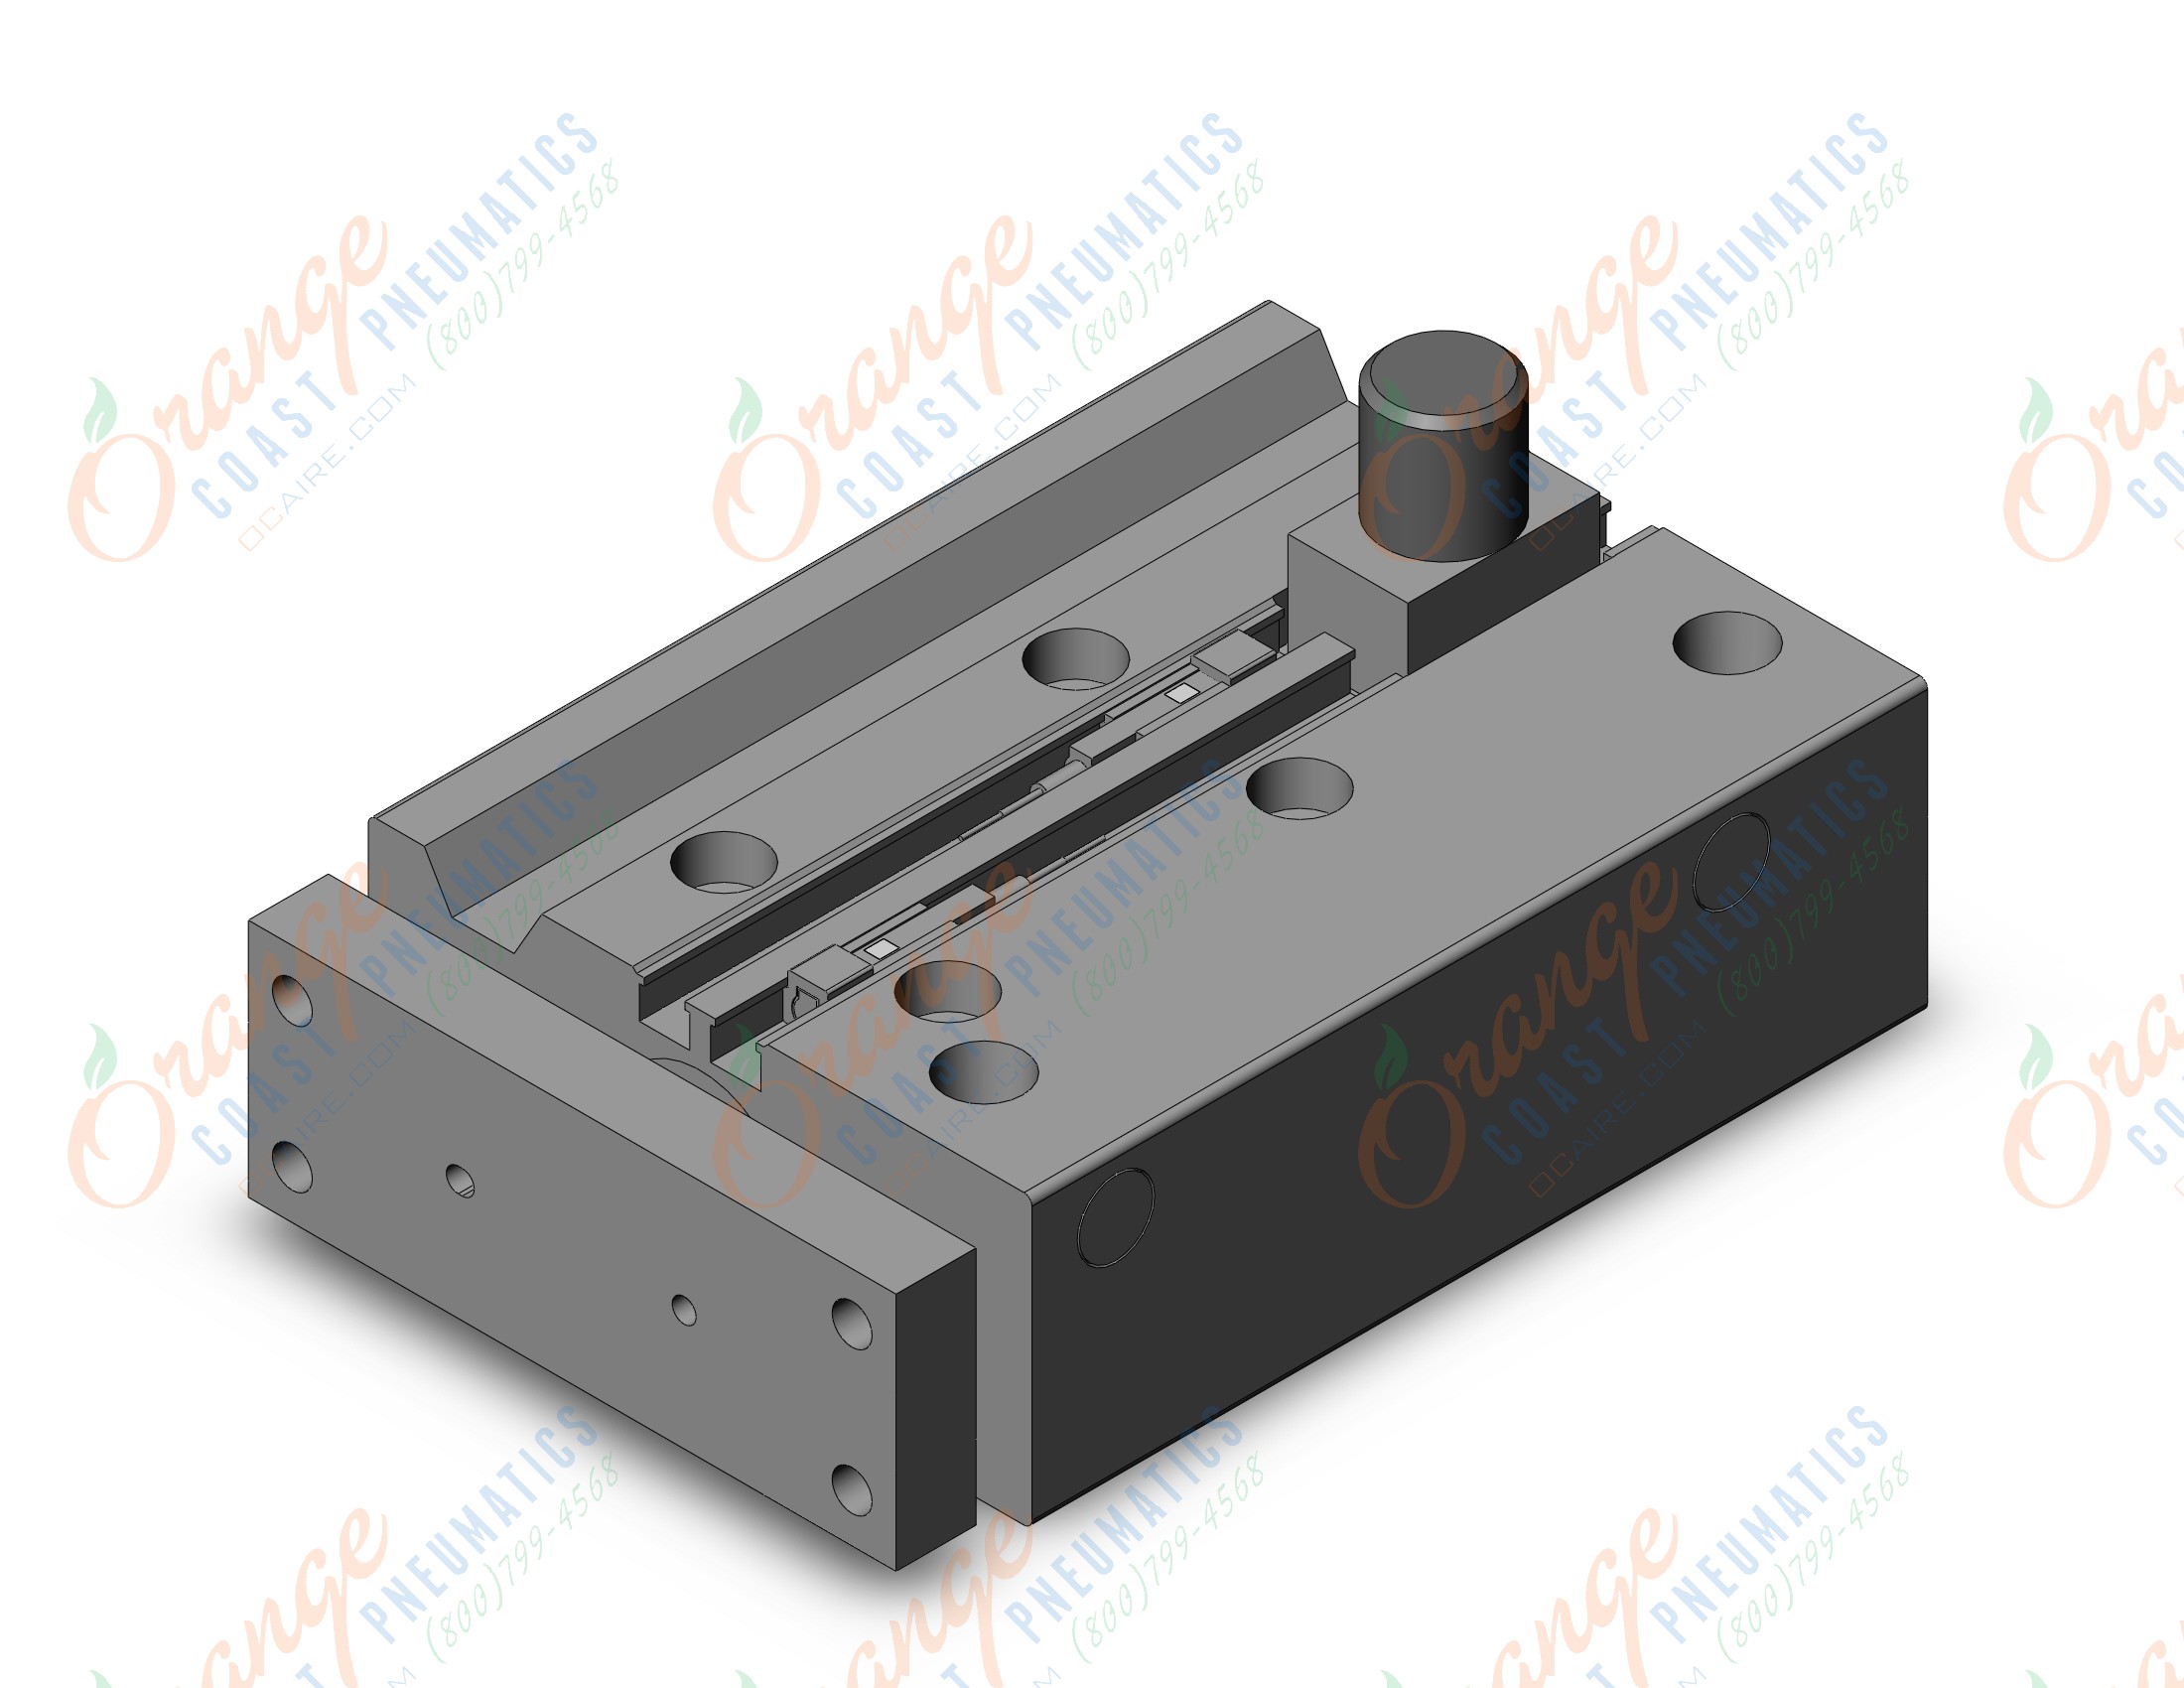 SMC MGPL20-50-HL-M9PL mgp, compact guide cylinder, GUIDED CYLINDER